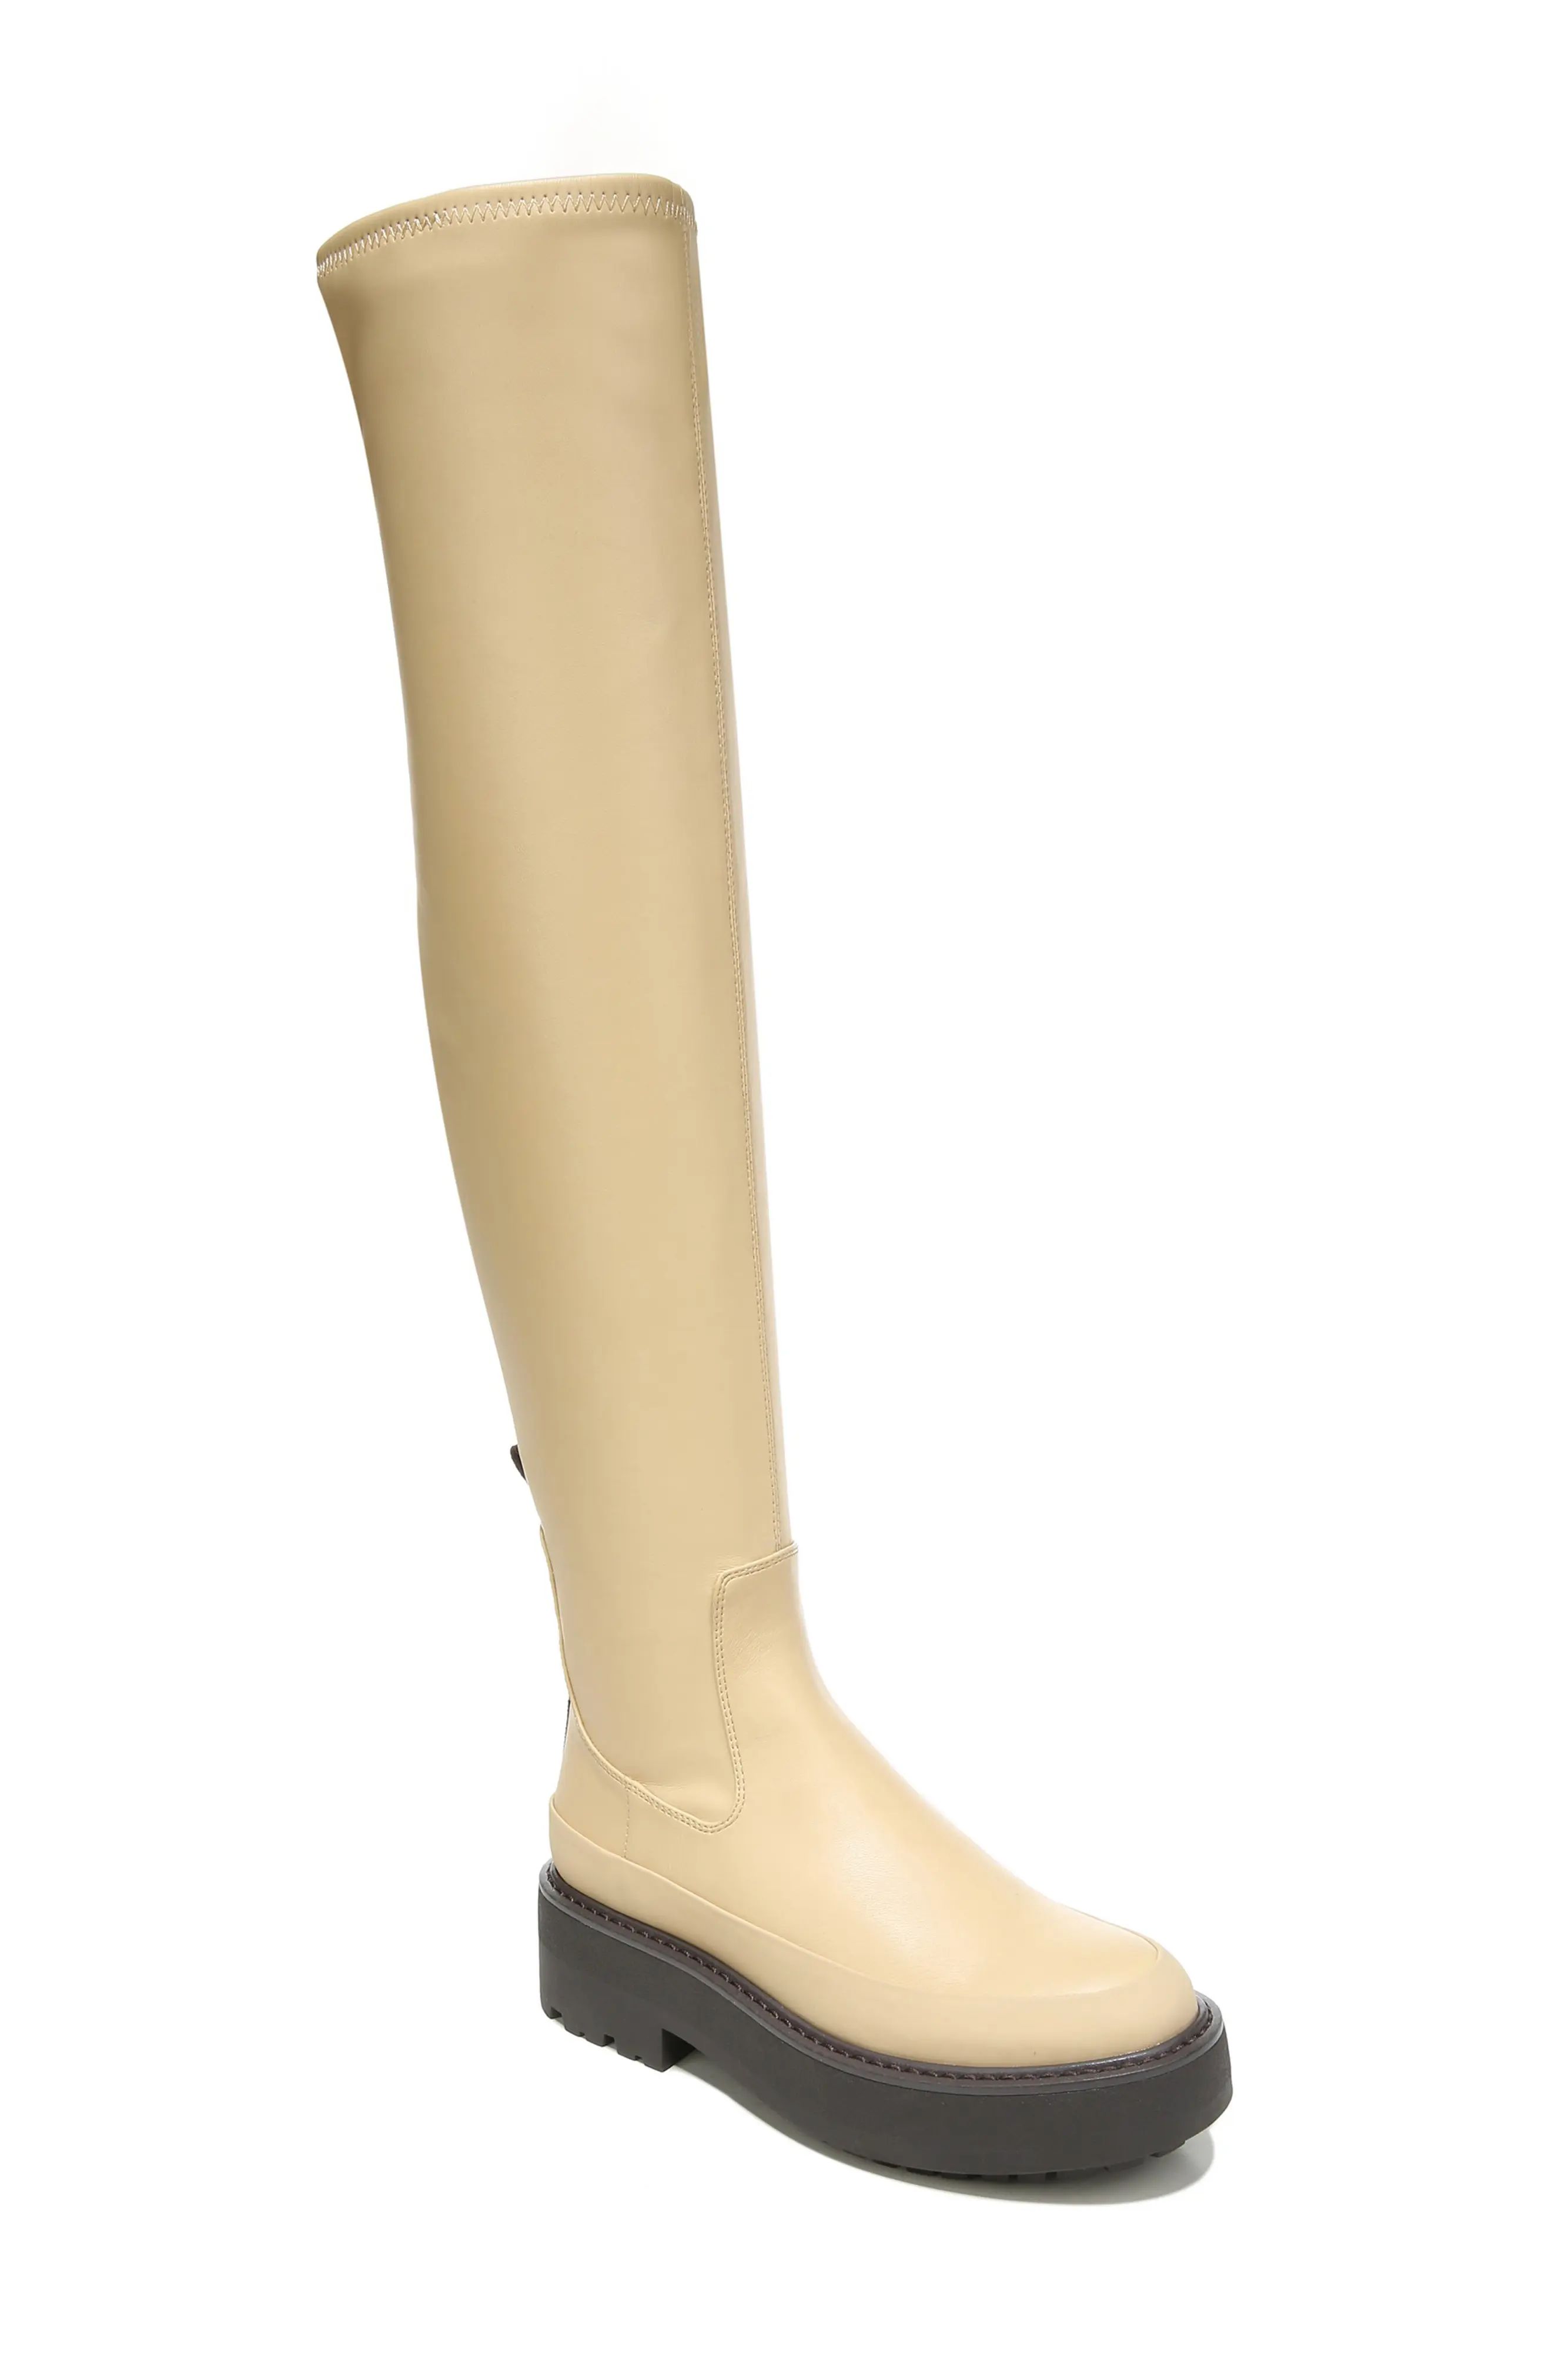 Franco Sarto Janna Over the Knee Boot, Size 8 in Beige at Nordstrom | Nordstrom